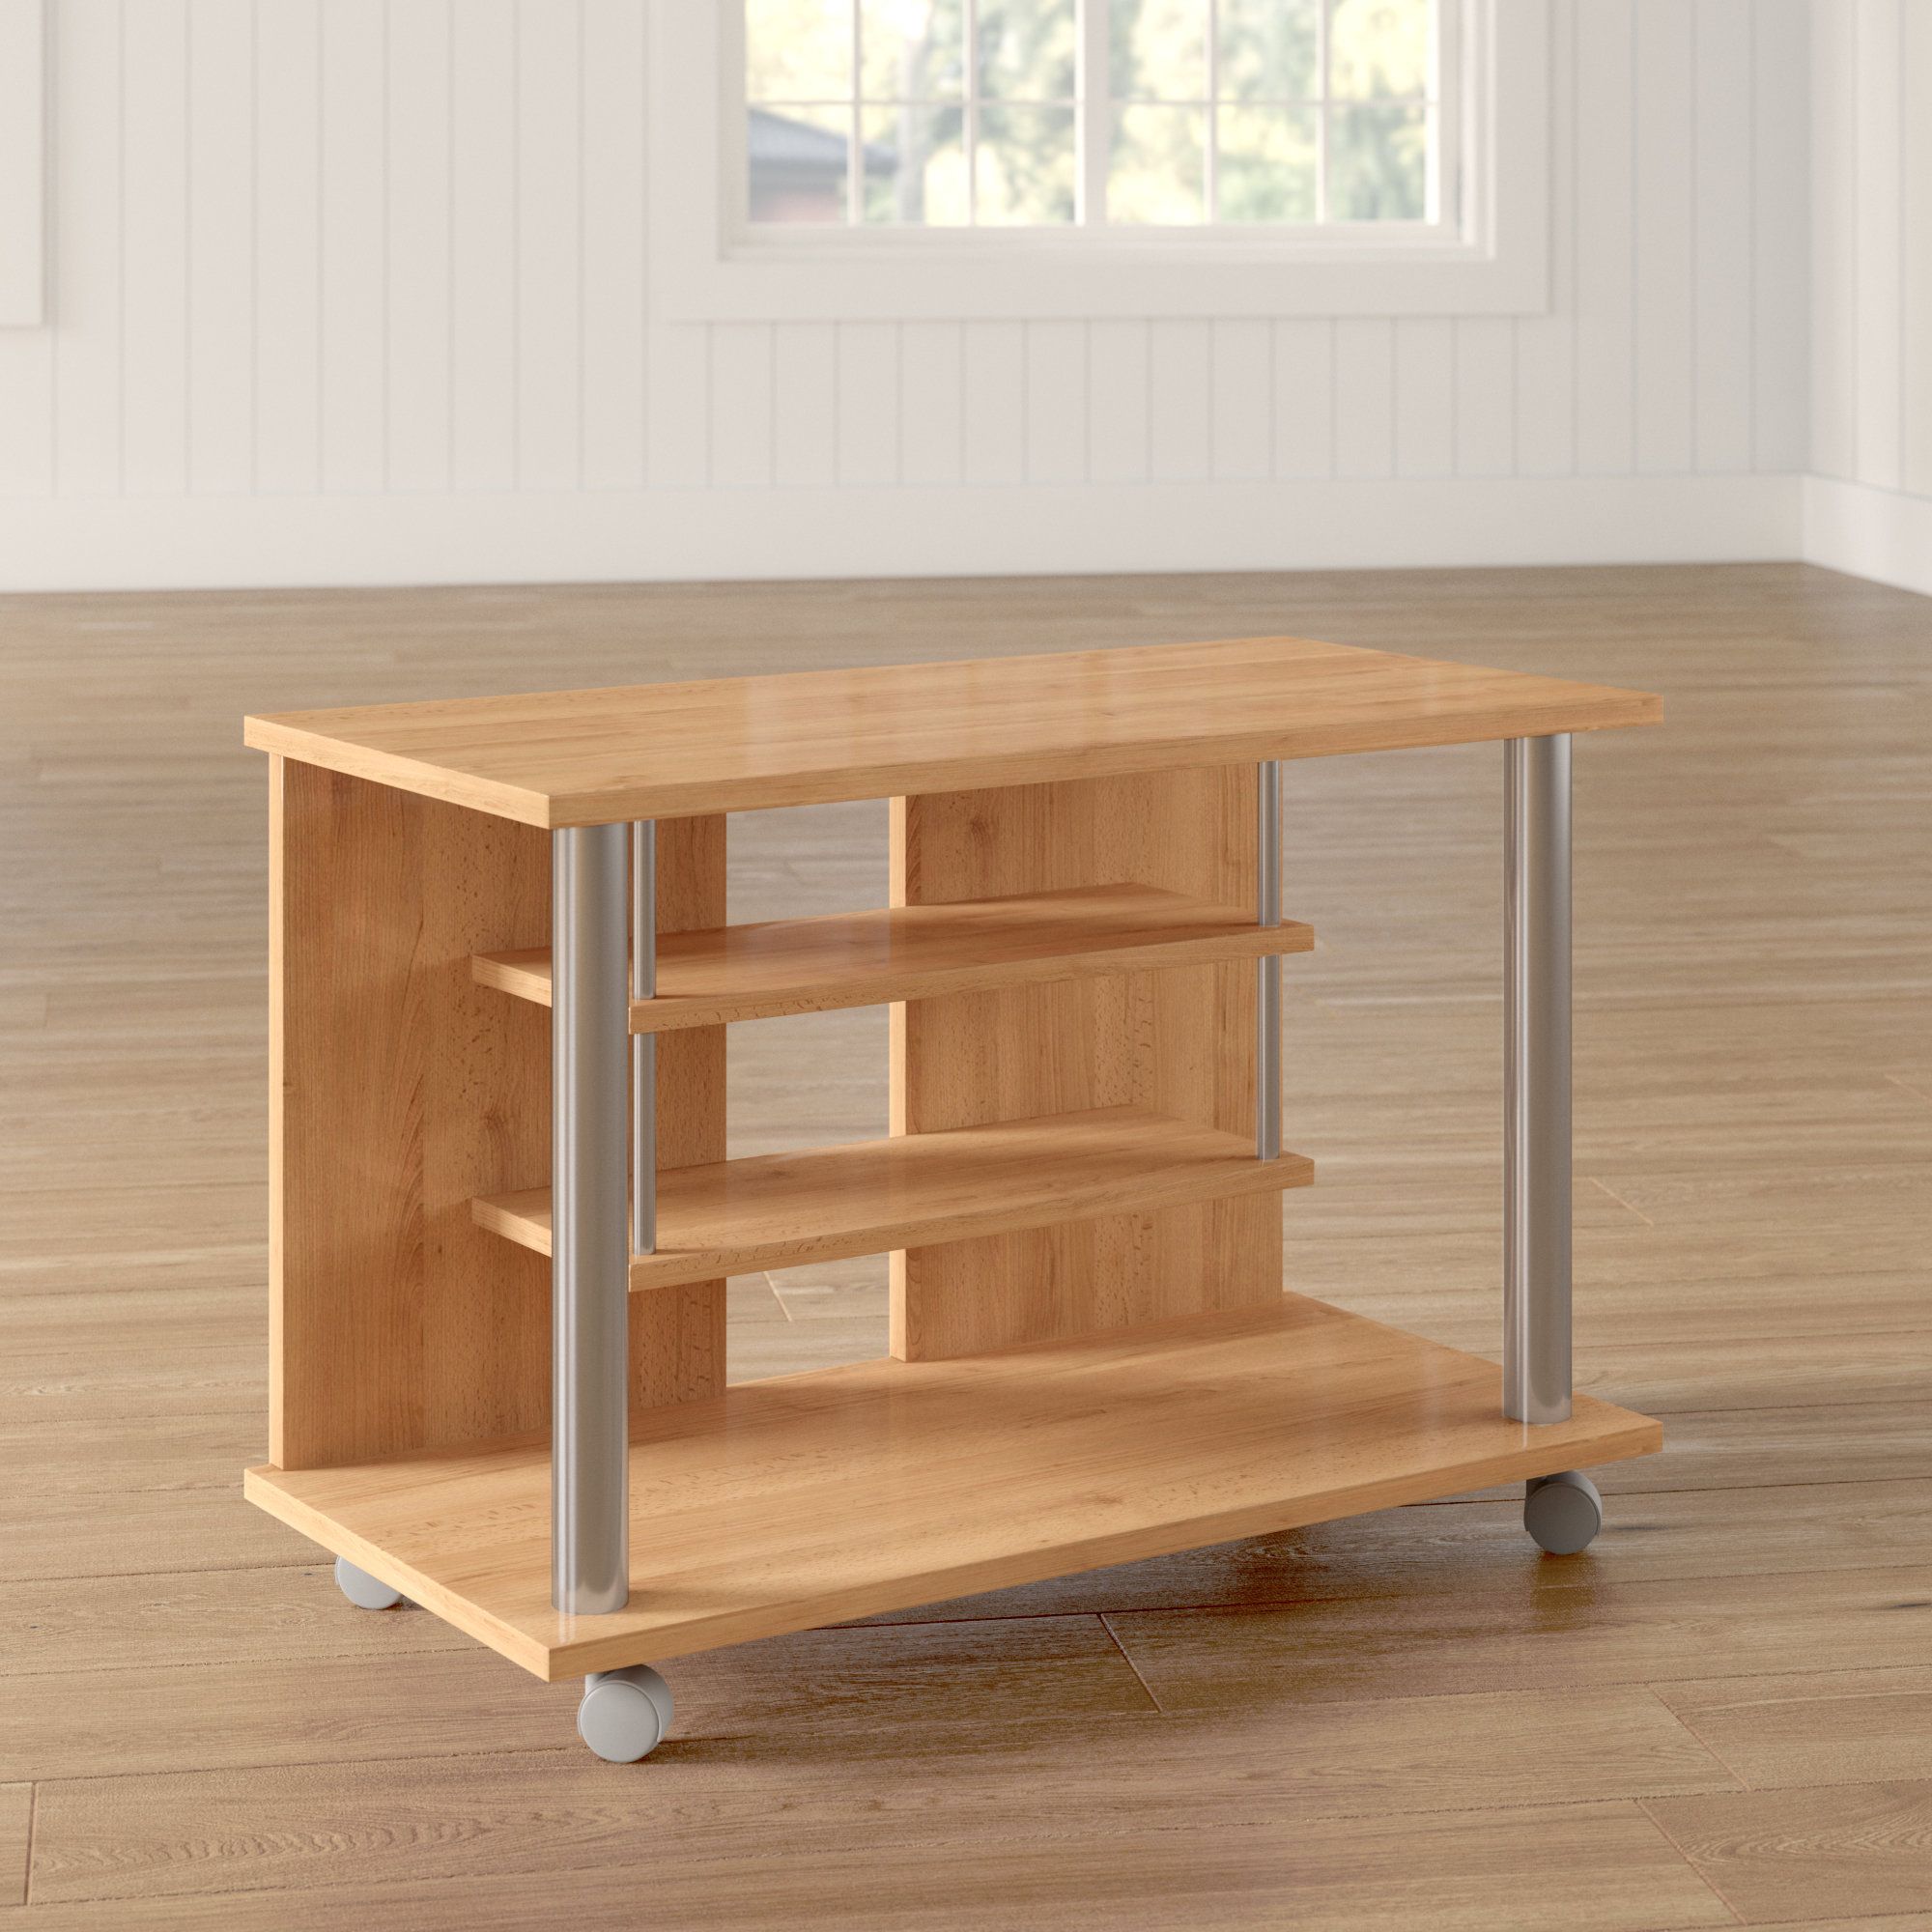 White Oval Tv Stands Regarding Most Popular Oval Tv Stand (View 11 of 20)